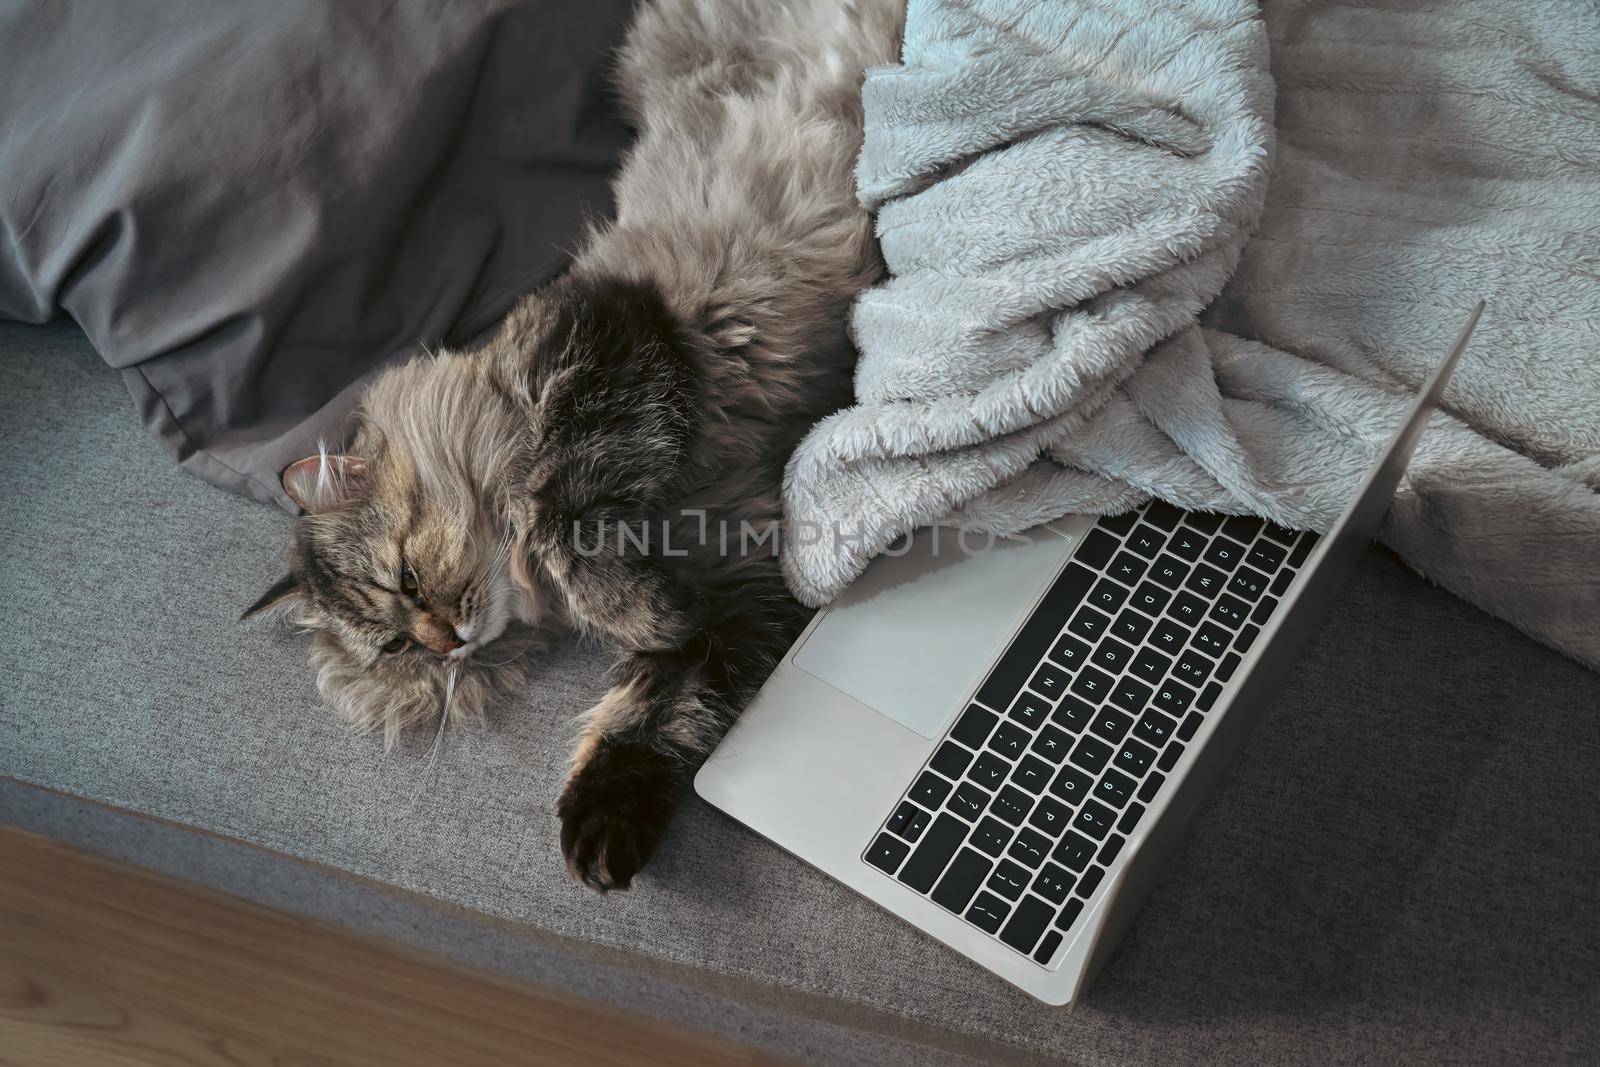 Mockup computer laptop and lovely cat on comfortable sofa.